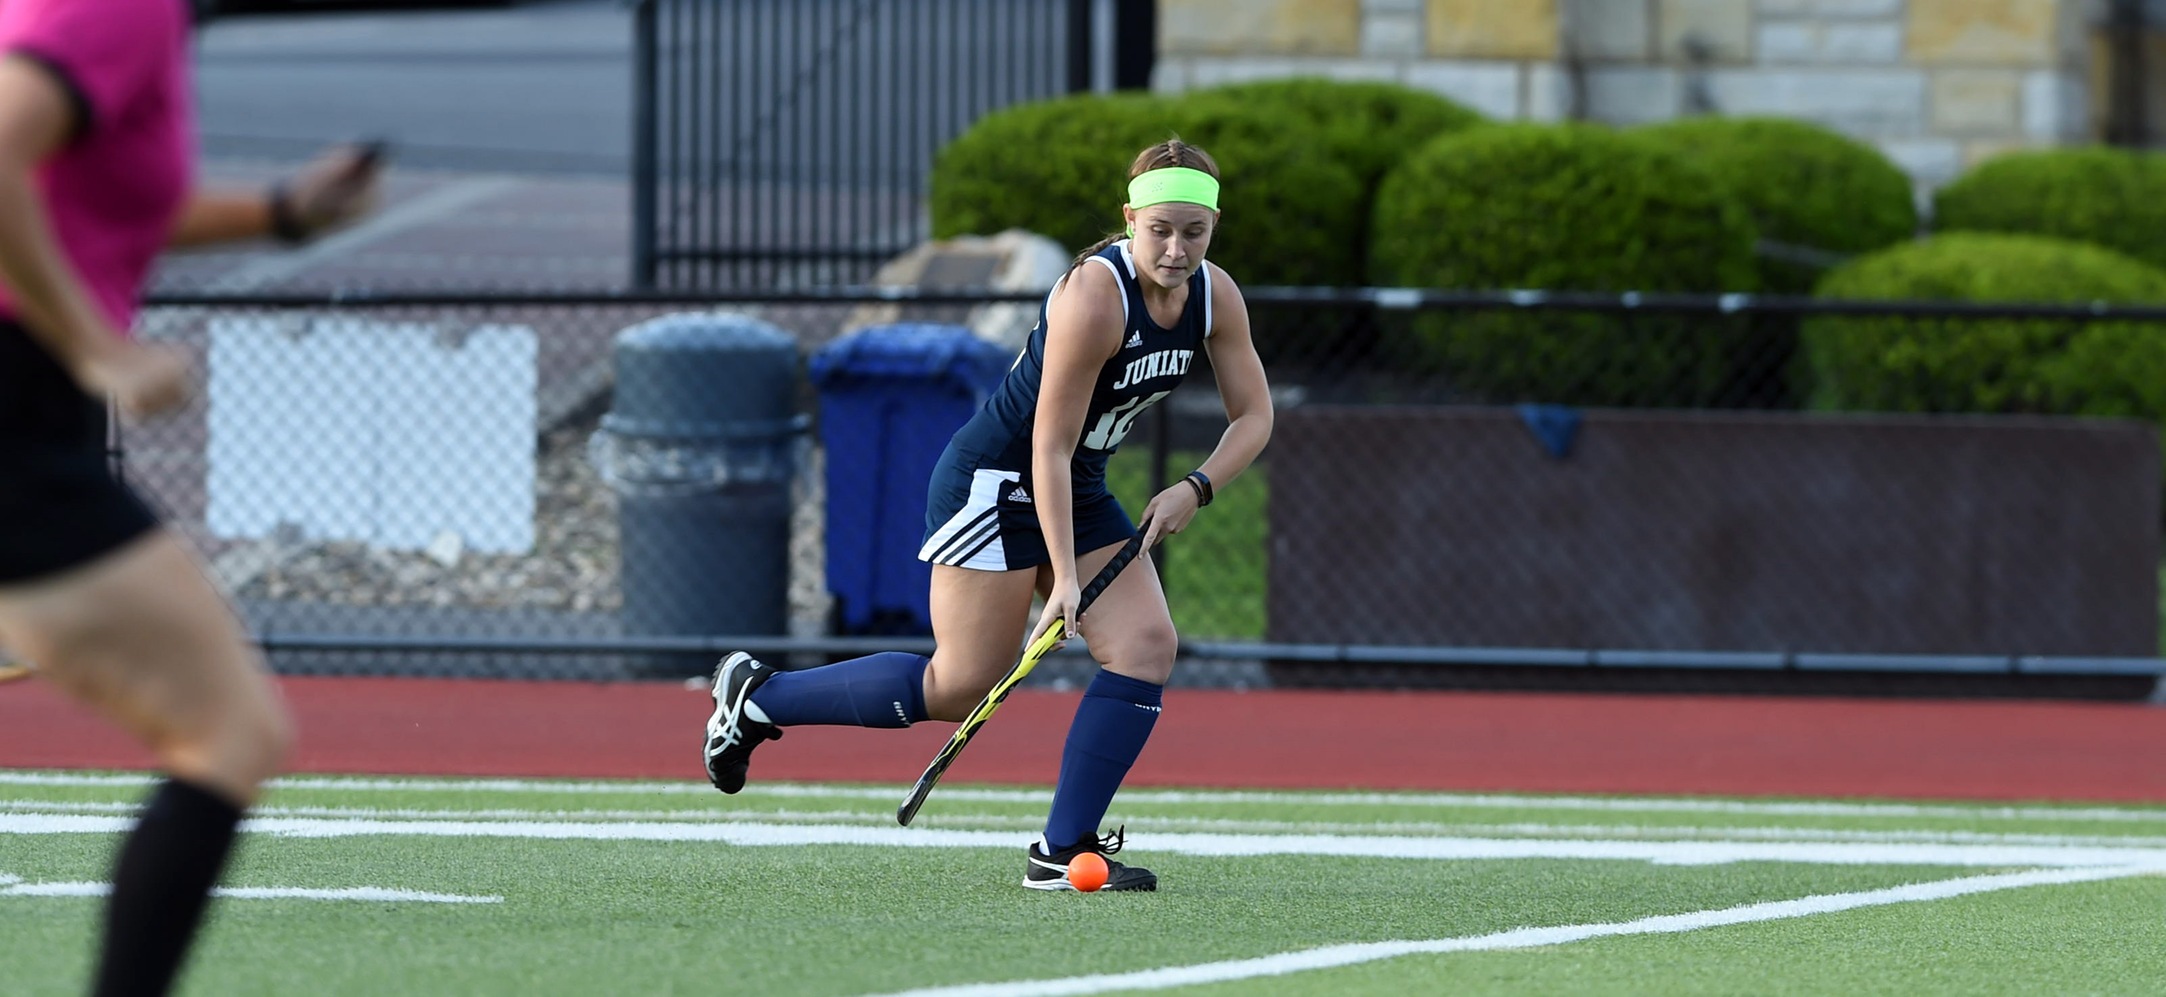 Olivia Marker tallied her sixth goal of the season in the Eagles win over No. 18, W&J.